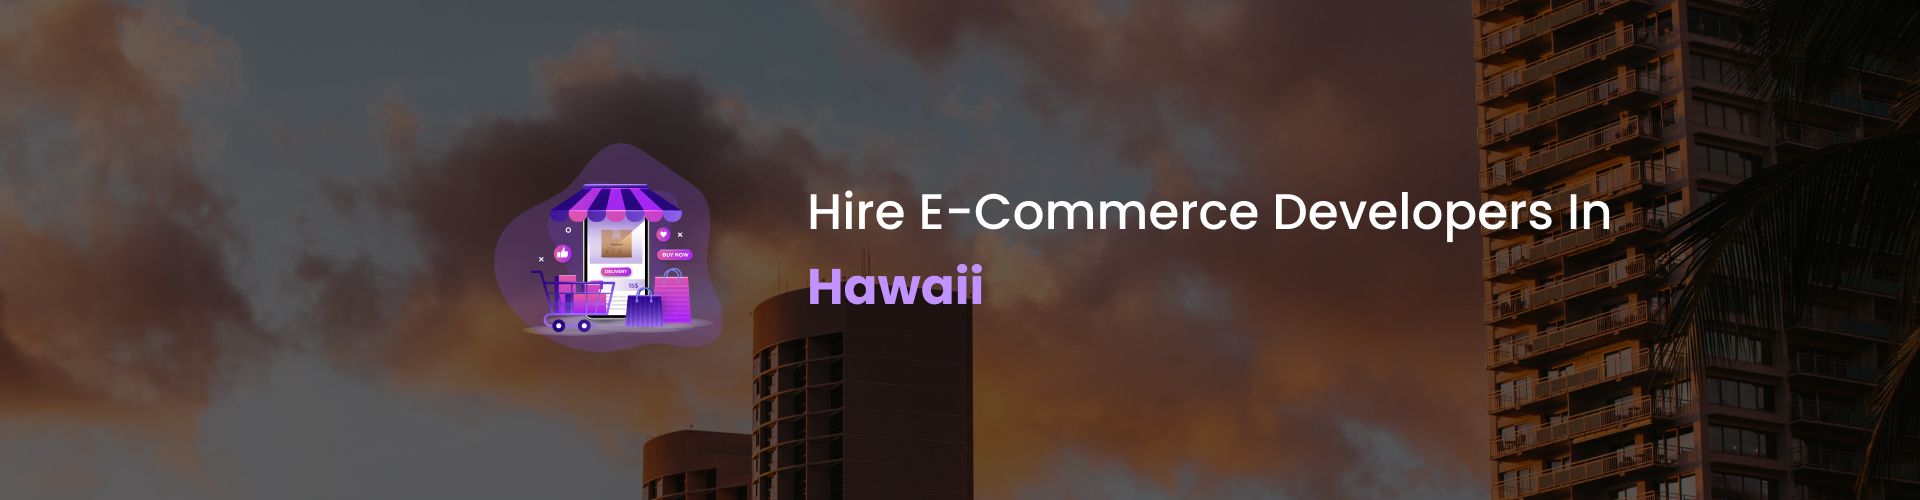 hire ecommerce developers in hawaii